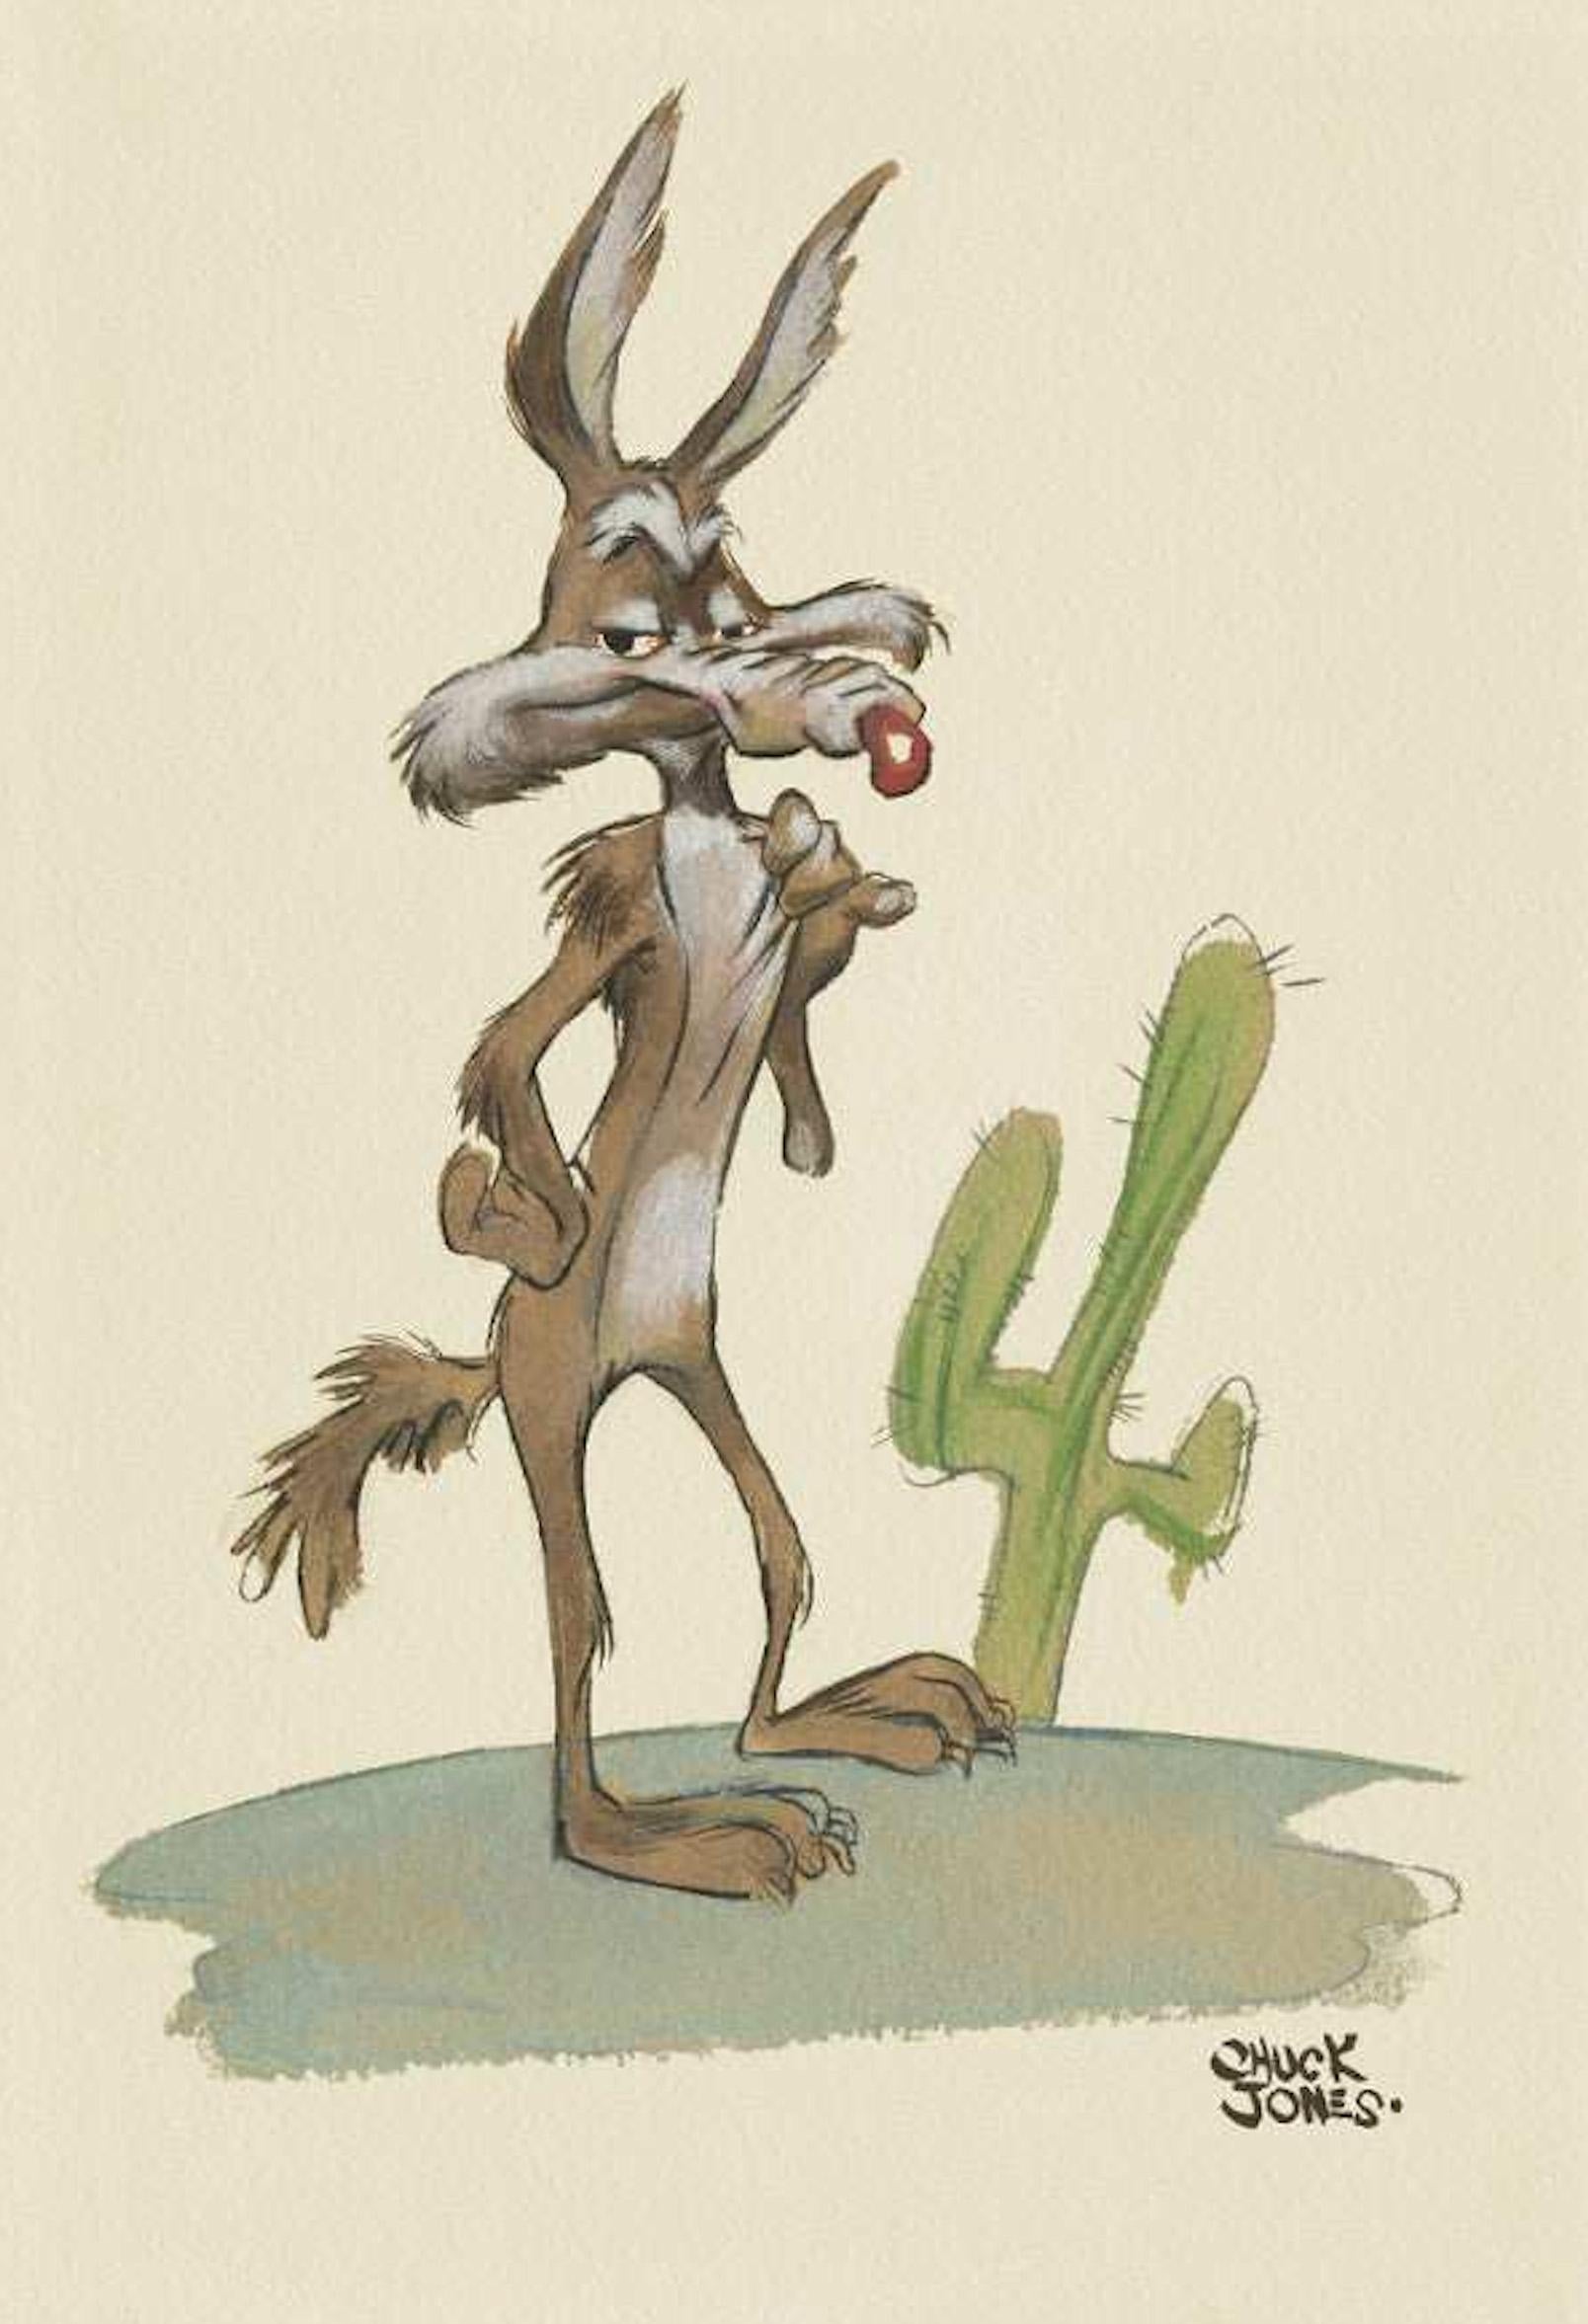 FOR LINDA AT 15

MEDIUM: Giclée on Paper
IMAGE SIZE: 24" x 15.5"
EDITION SIZE: 75
SKU: GICLEE-254

ABOUT THE IMAGE: An image of Wile E. Coyote standing in front of a cactus. It was from a birthday card that Chuck Jones drew for his daughter Linda